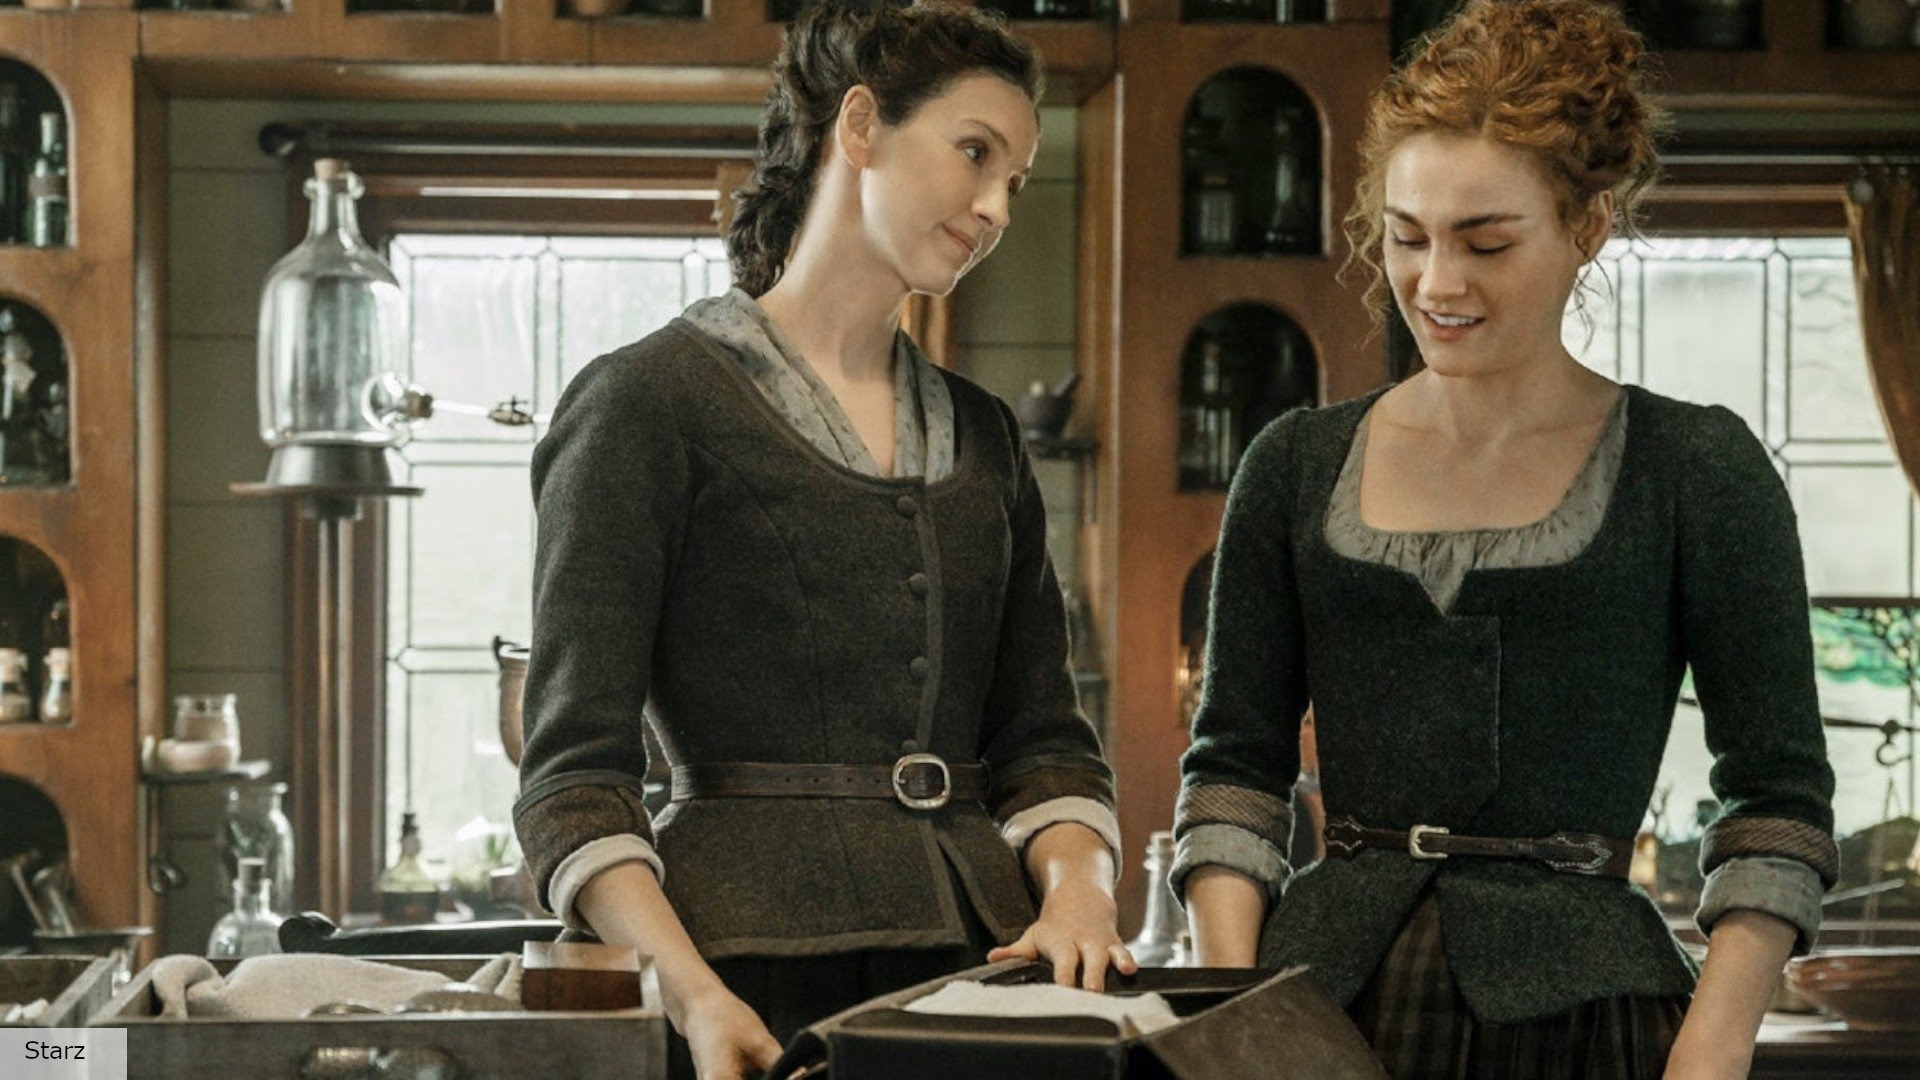 Outlander season 7 release date: Claire and Brianna in the kitchen